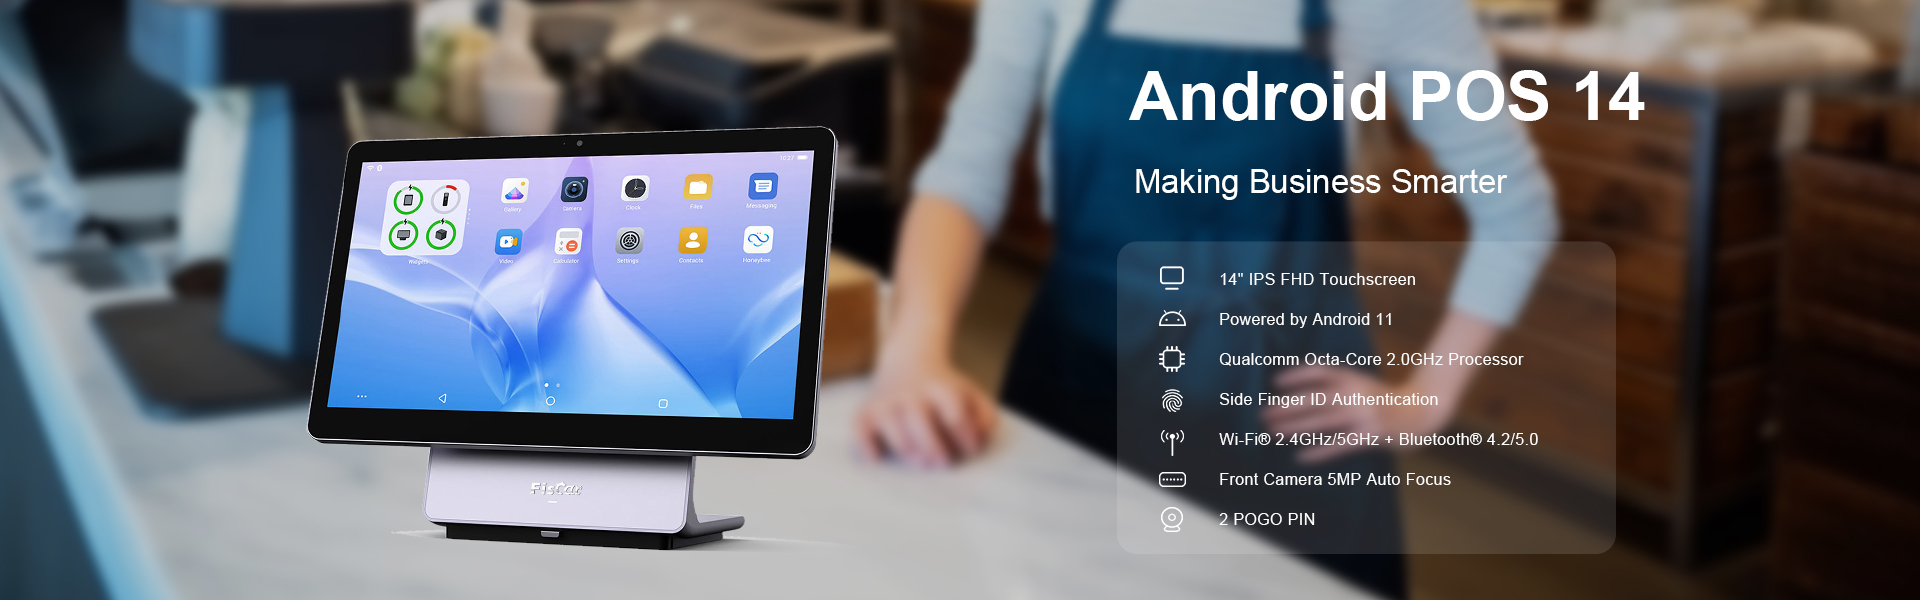 Android POS 14